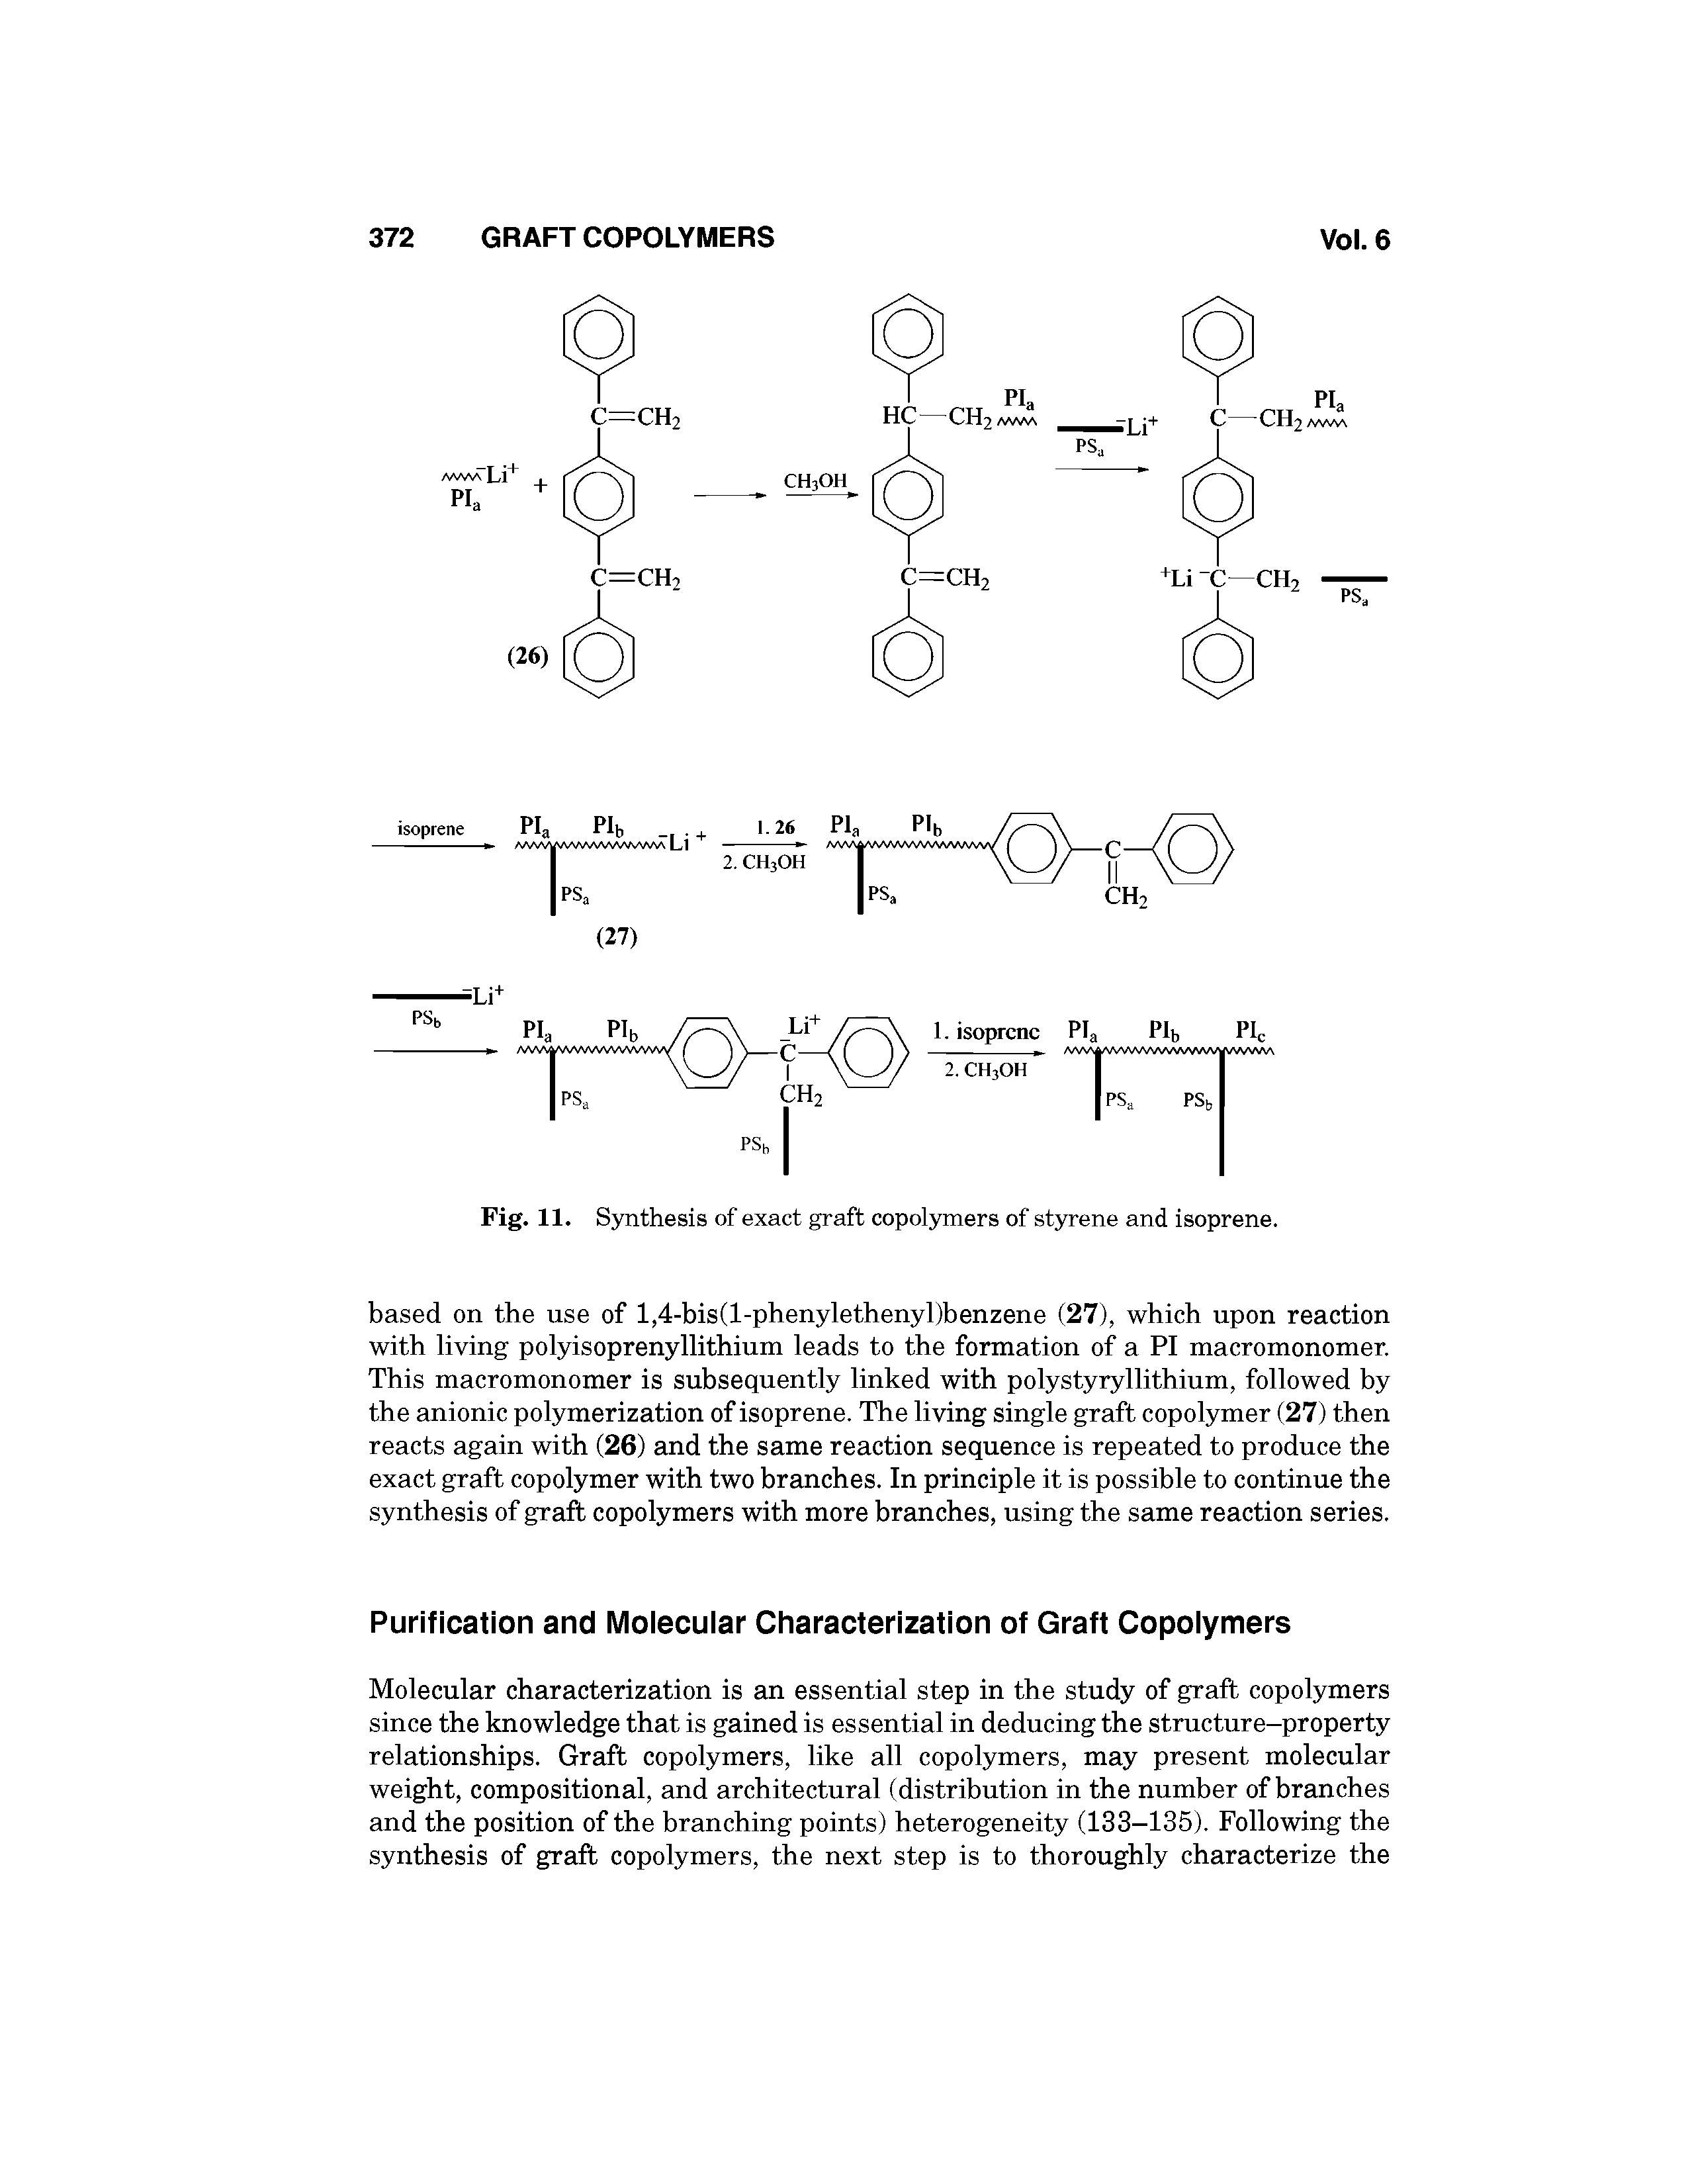 Fig. 11. Synthesis of exact graft copolymers of styrene and isoprene.